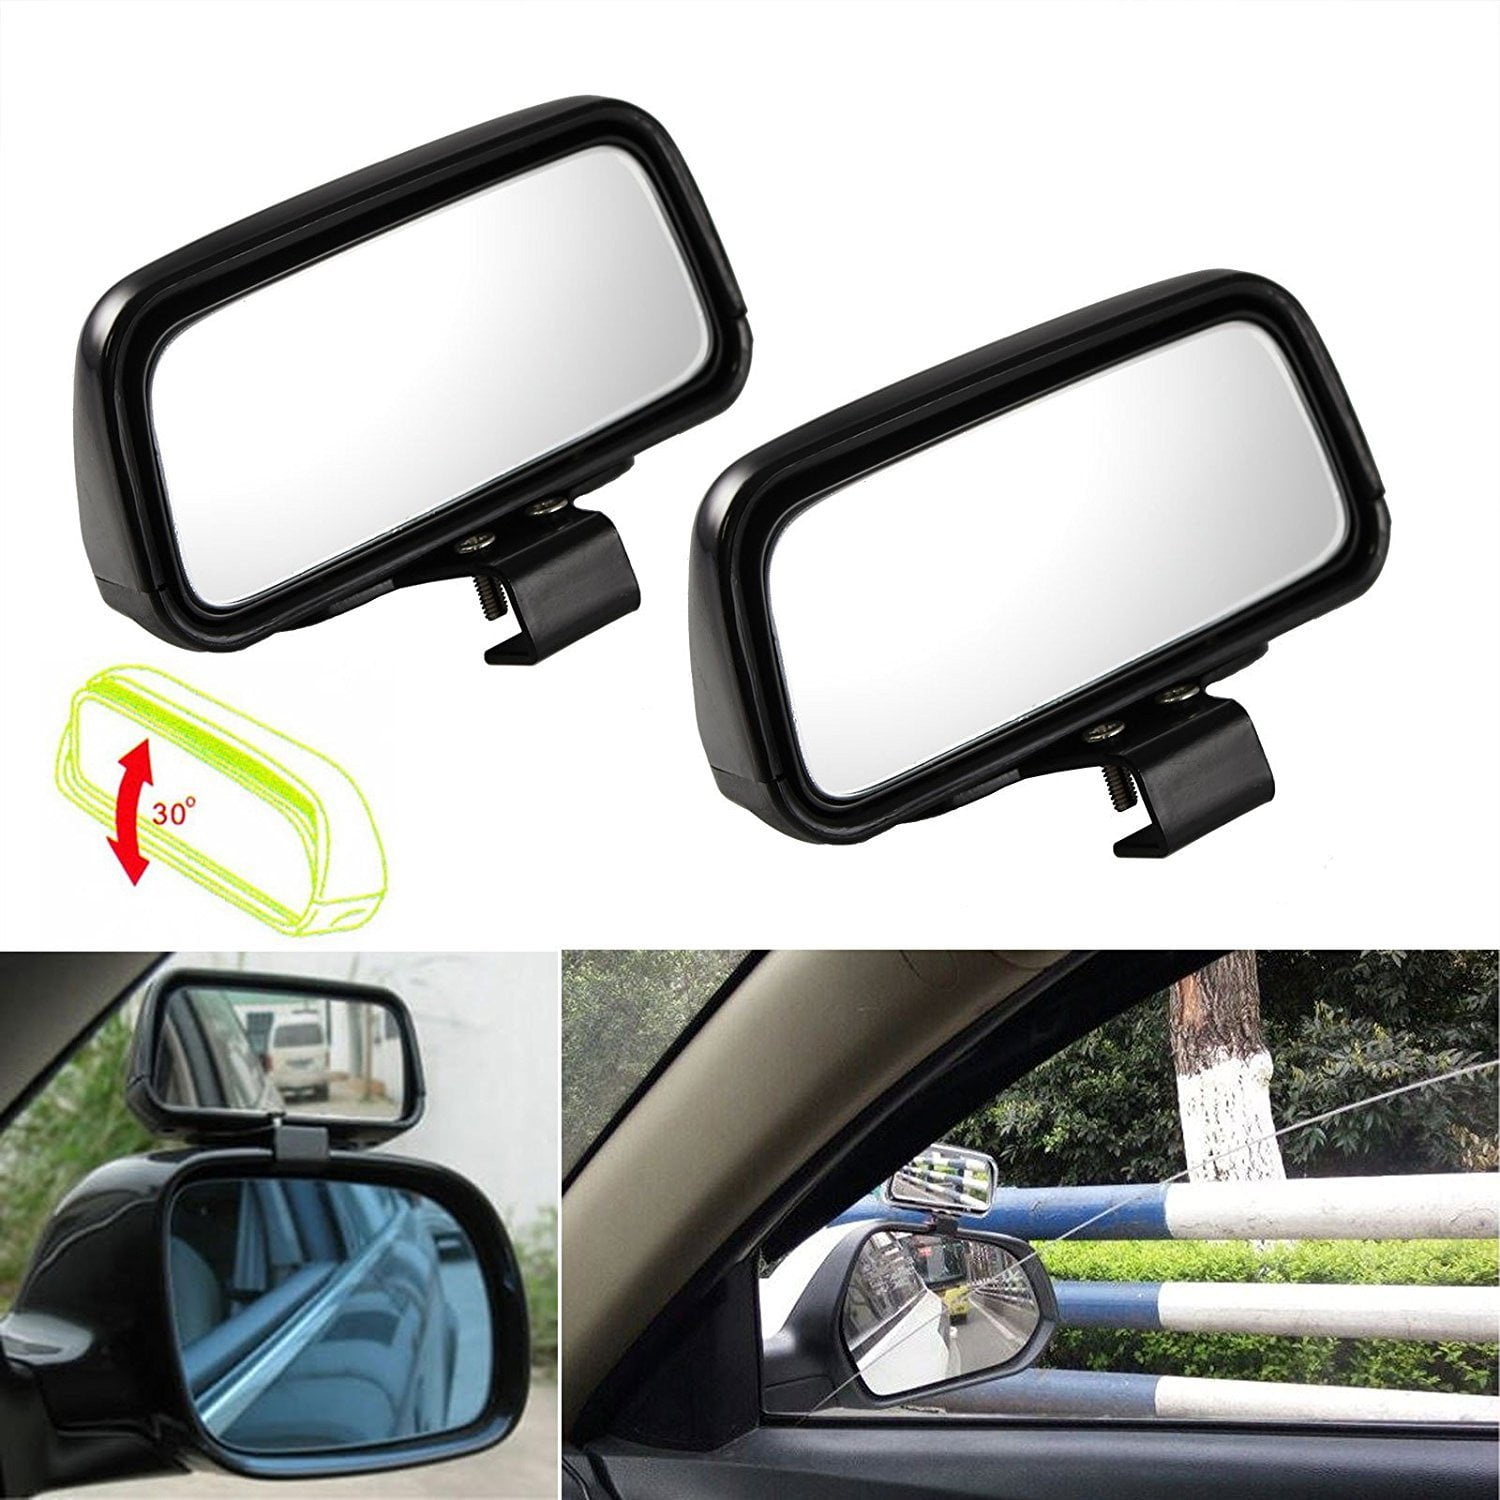 TR.OD 2PCS Adjustable Car Mirror Blind Spot Side Rear View Convex Wide Angle Parking No frame Square 